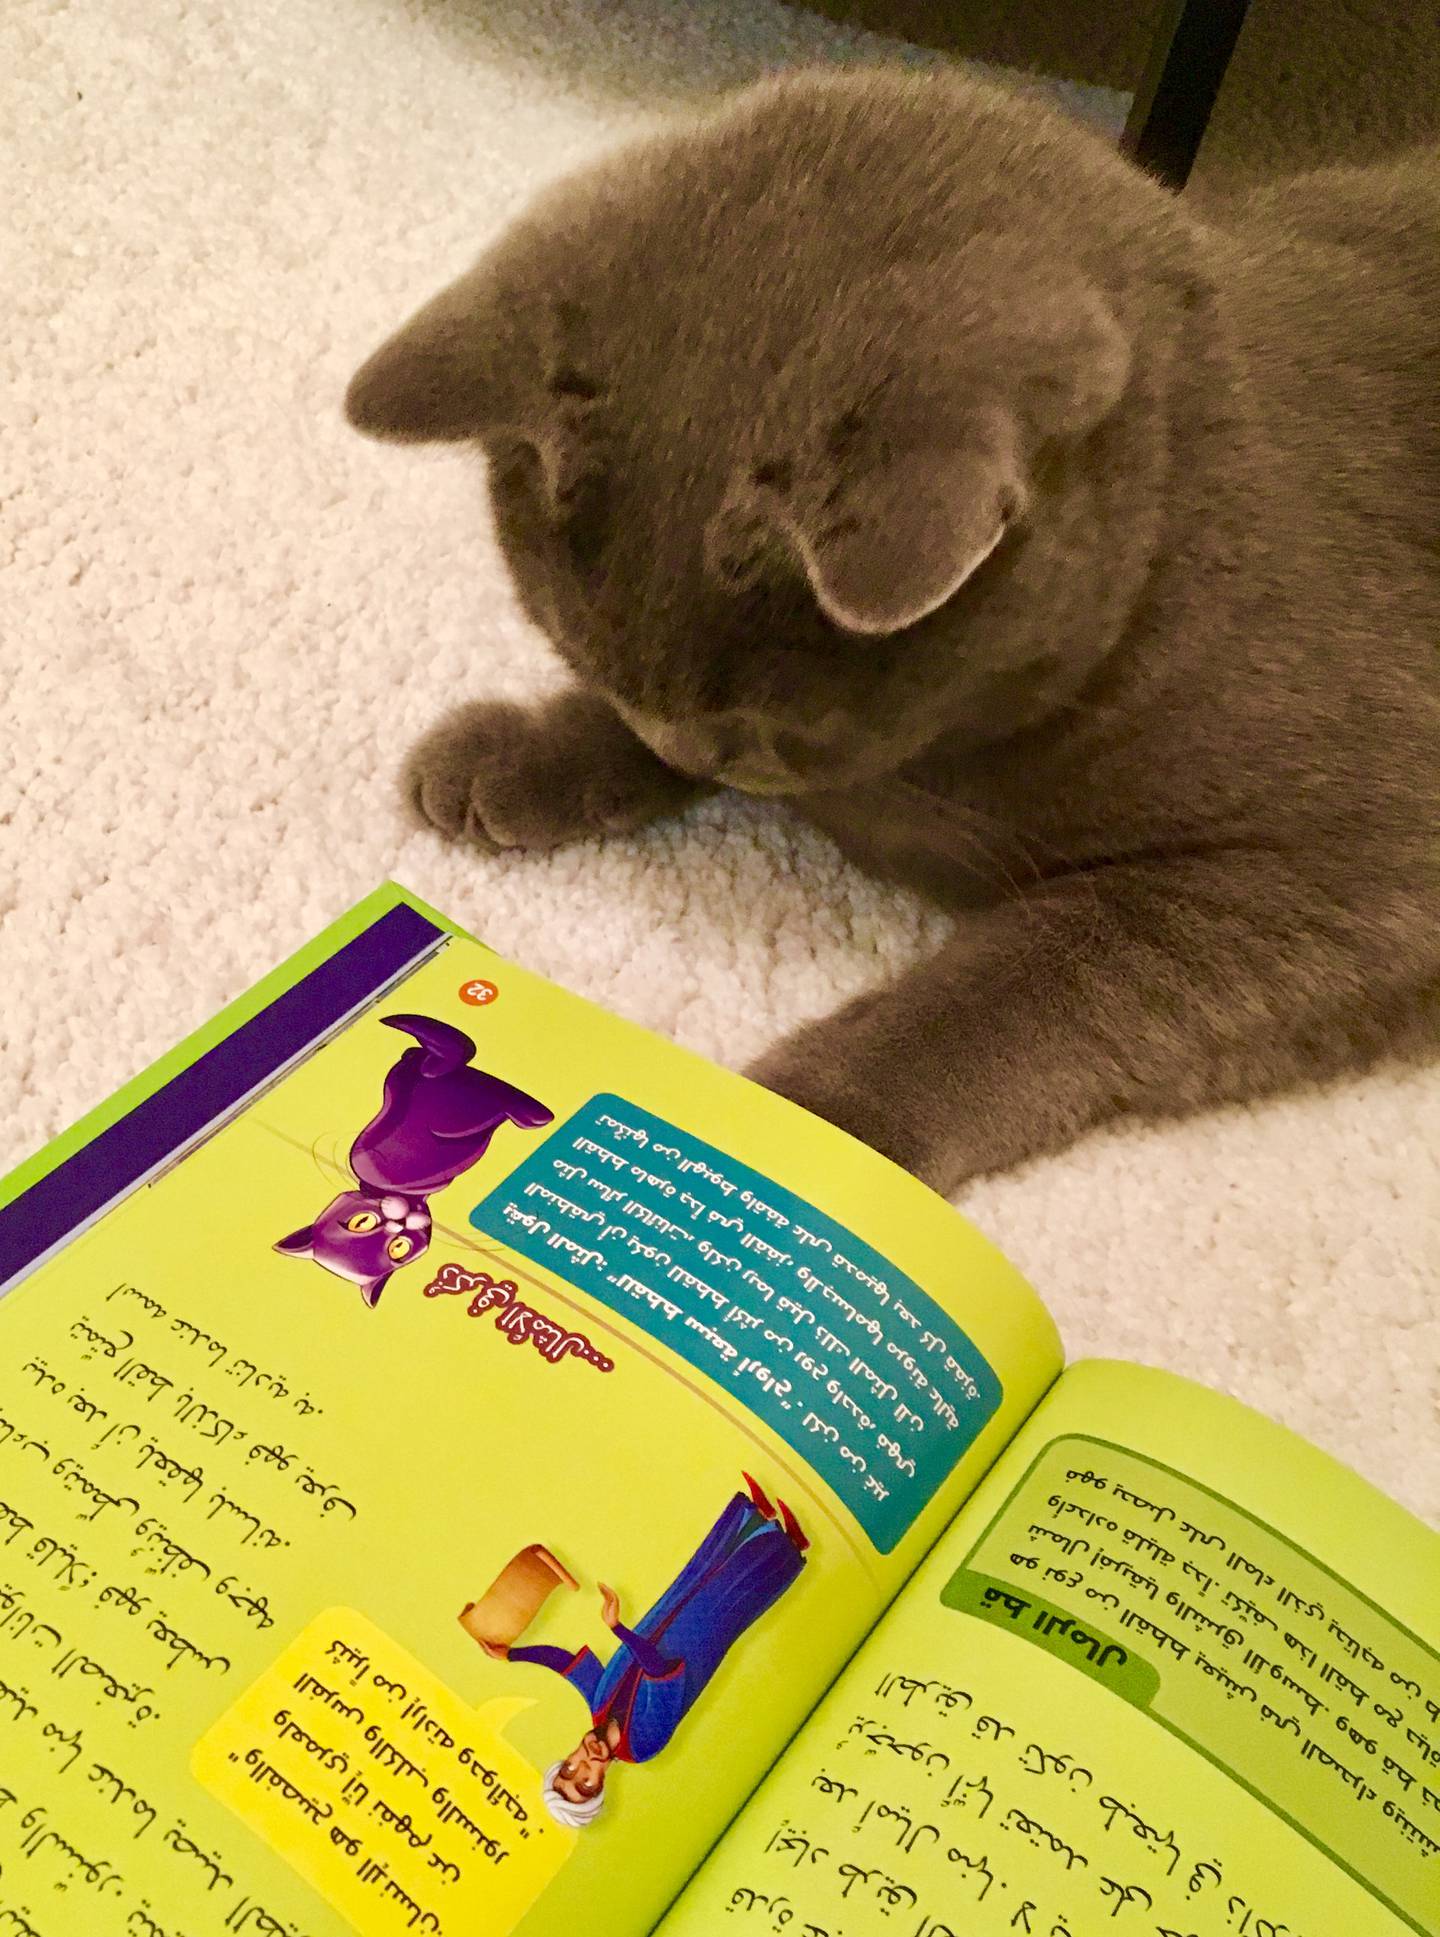 Simsim, the cat that inspired 1001 Paws, studies a book advocating animal care